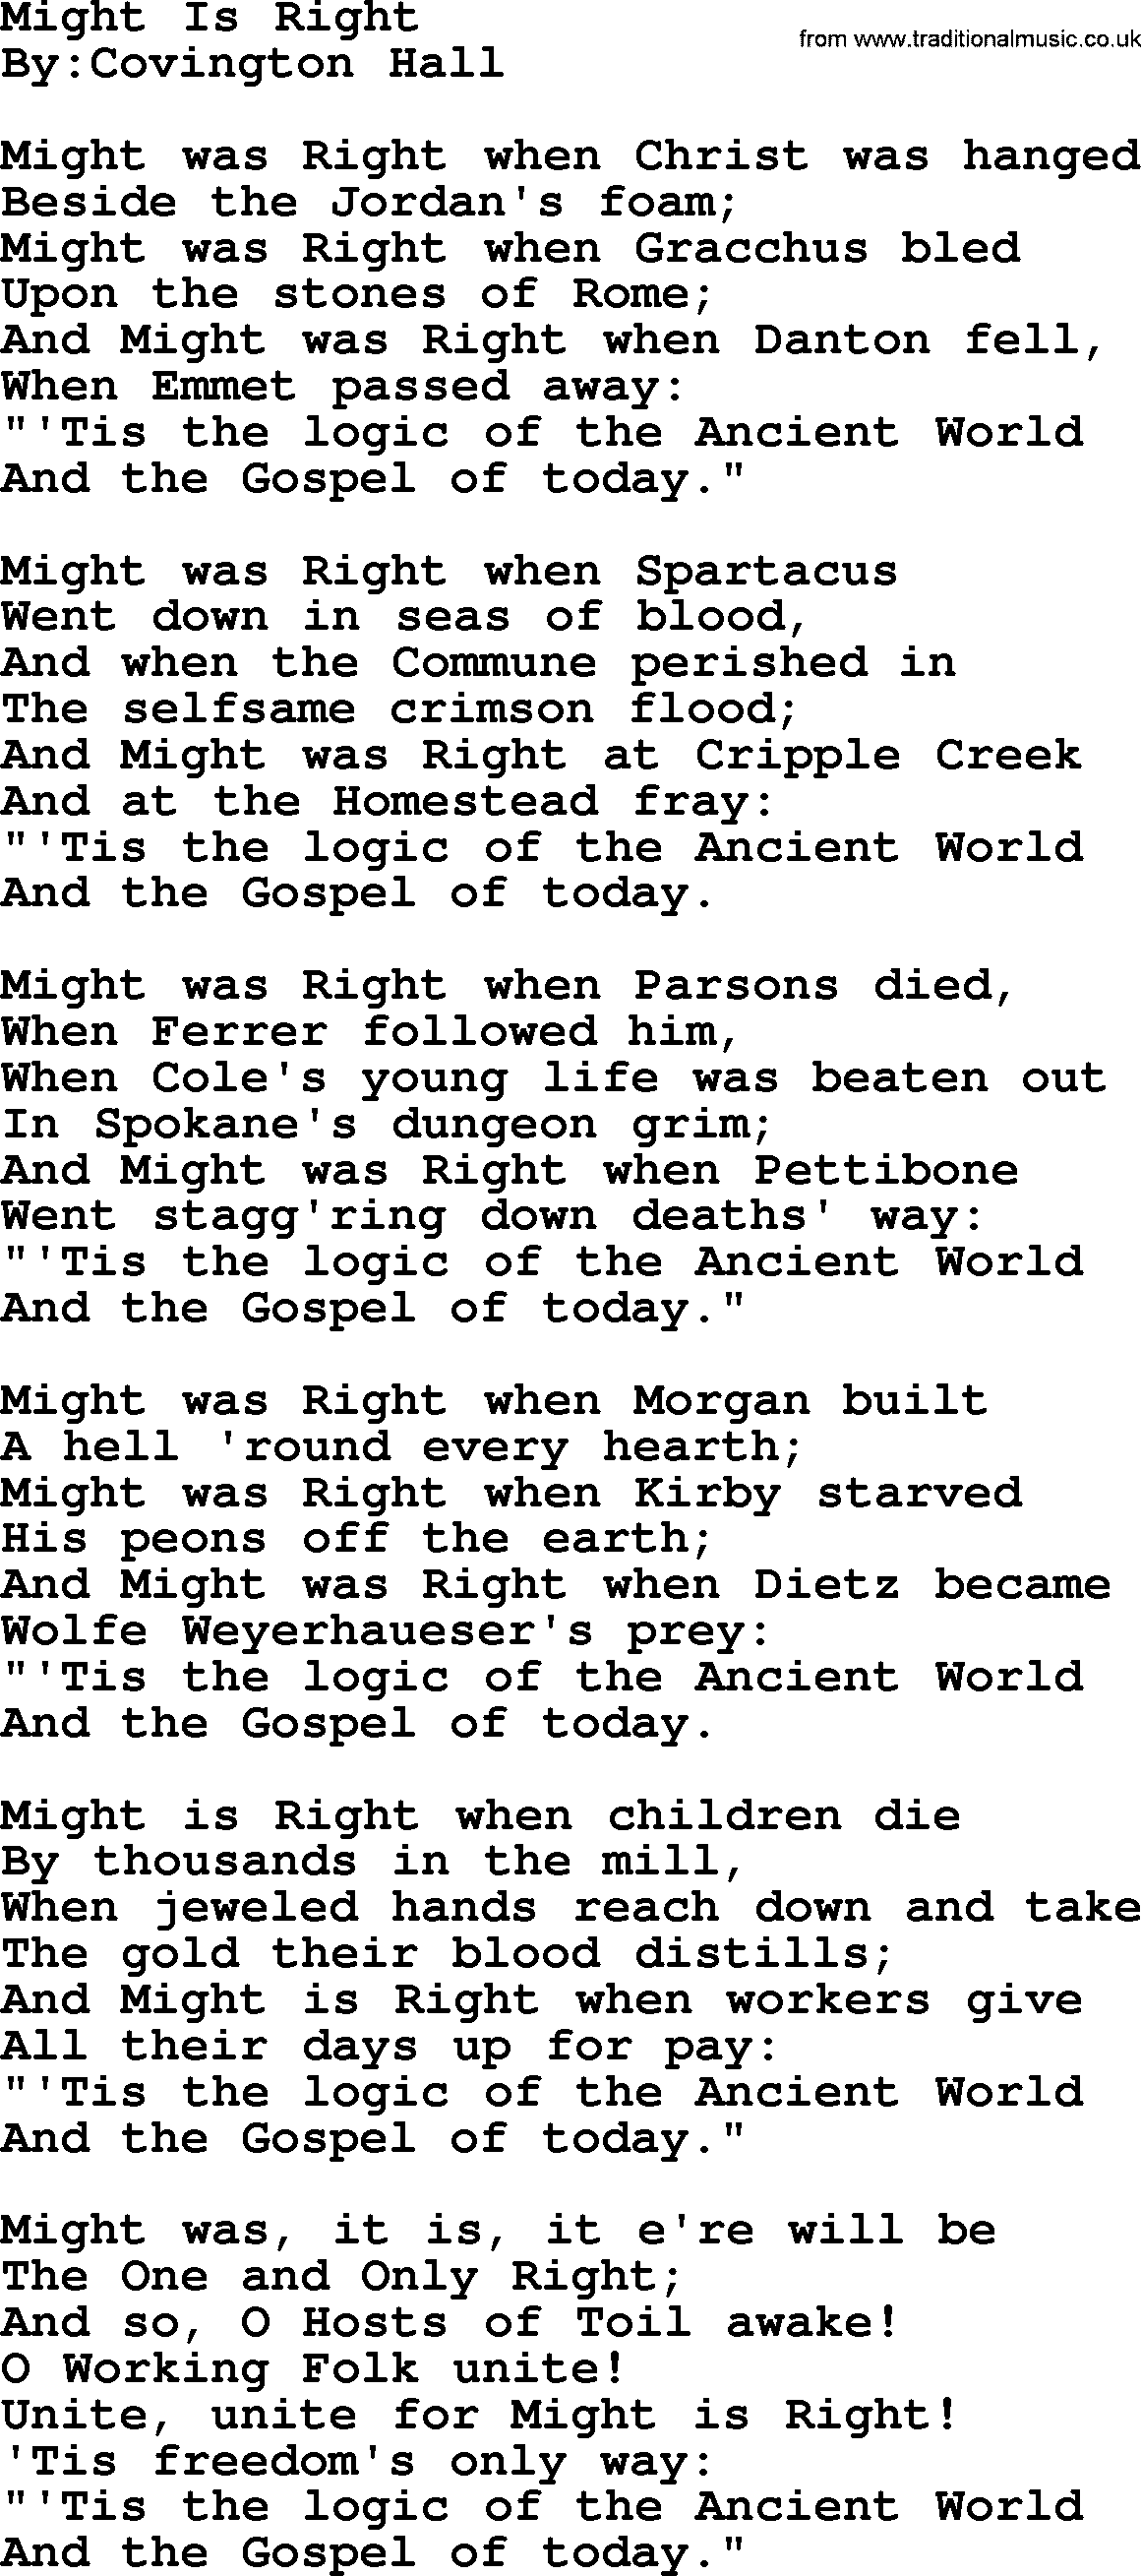 Political, Solidarity, Workers or Union song: Might Is Right, lyrics